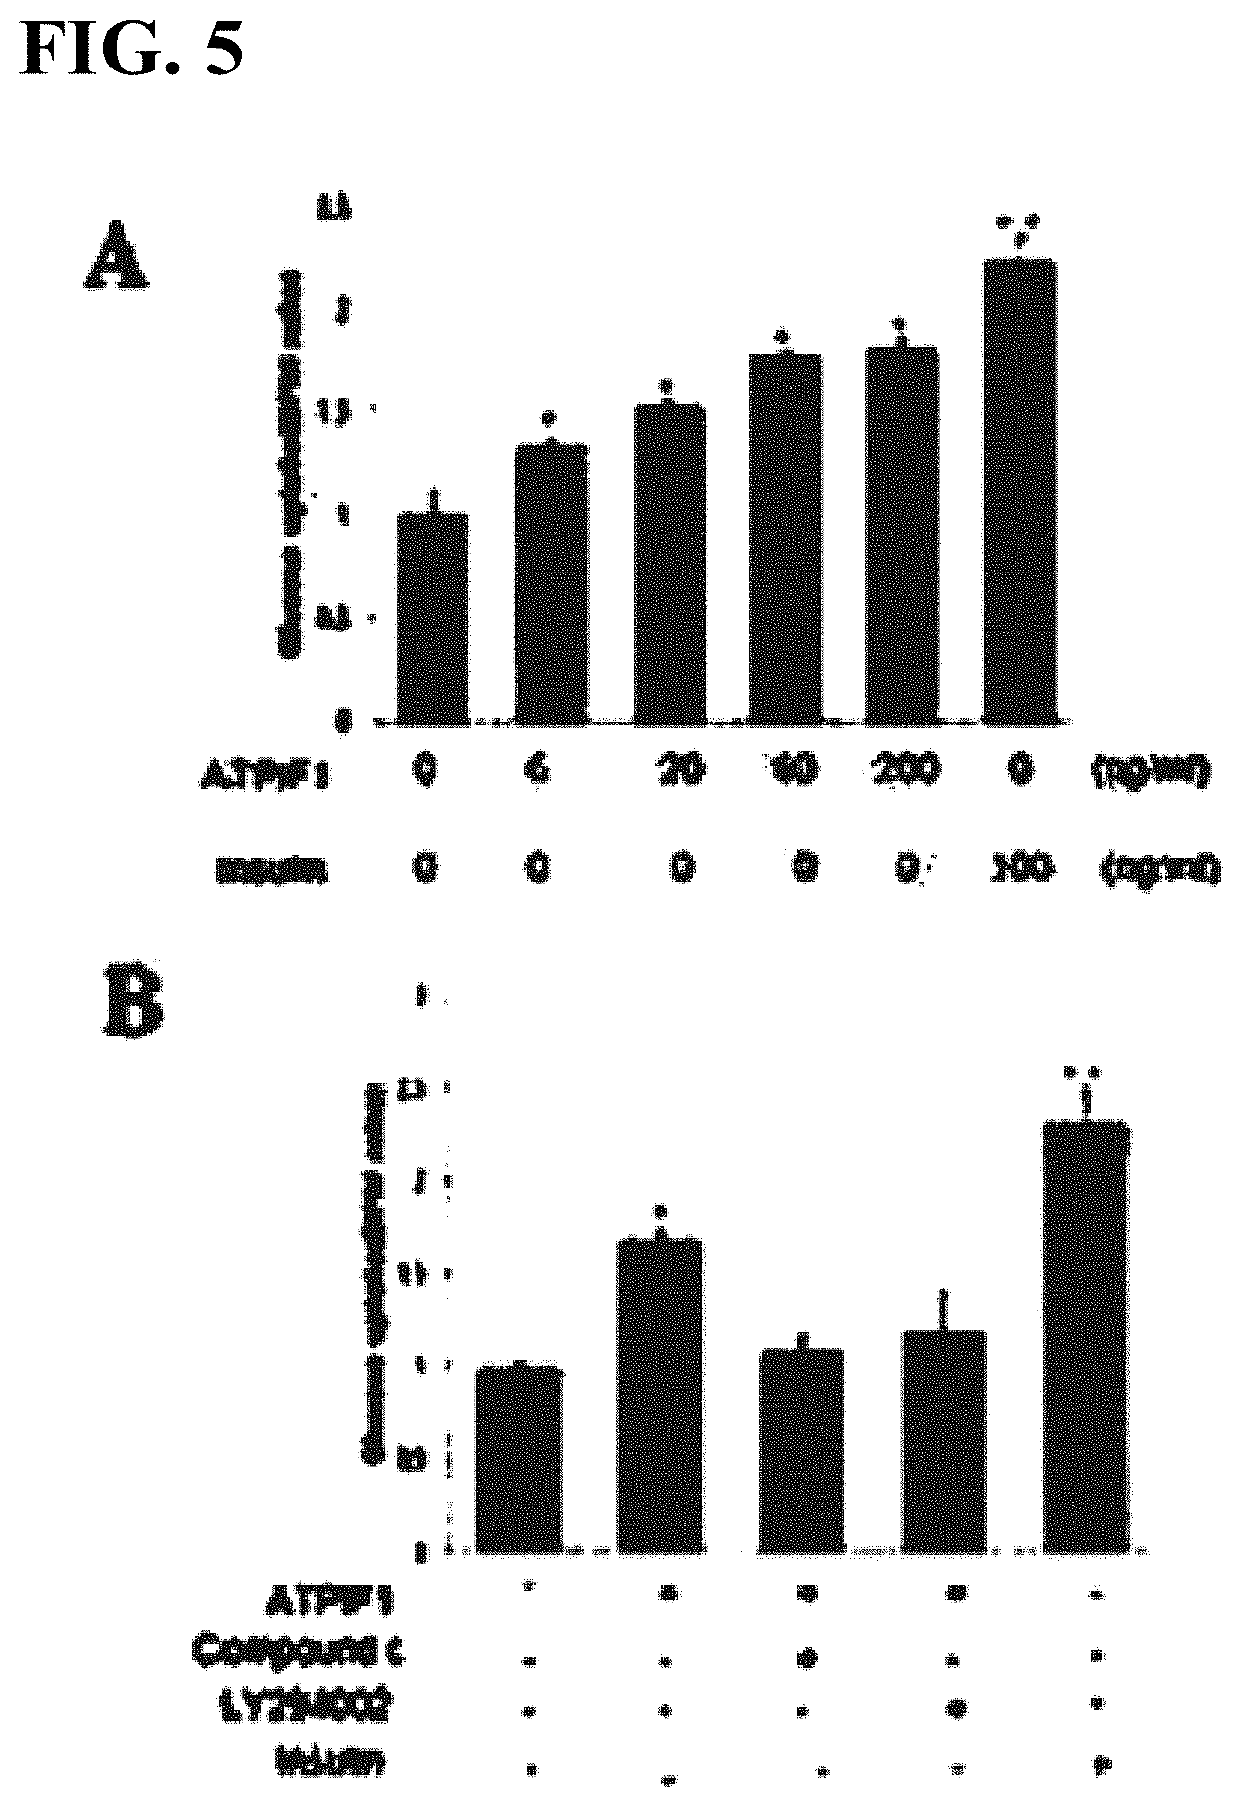 Pharmaceutical composition containing atpif1 for treatment of diabetes